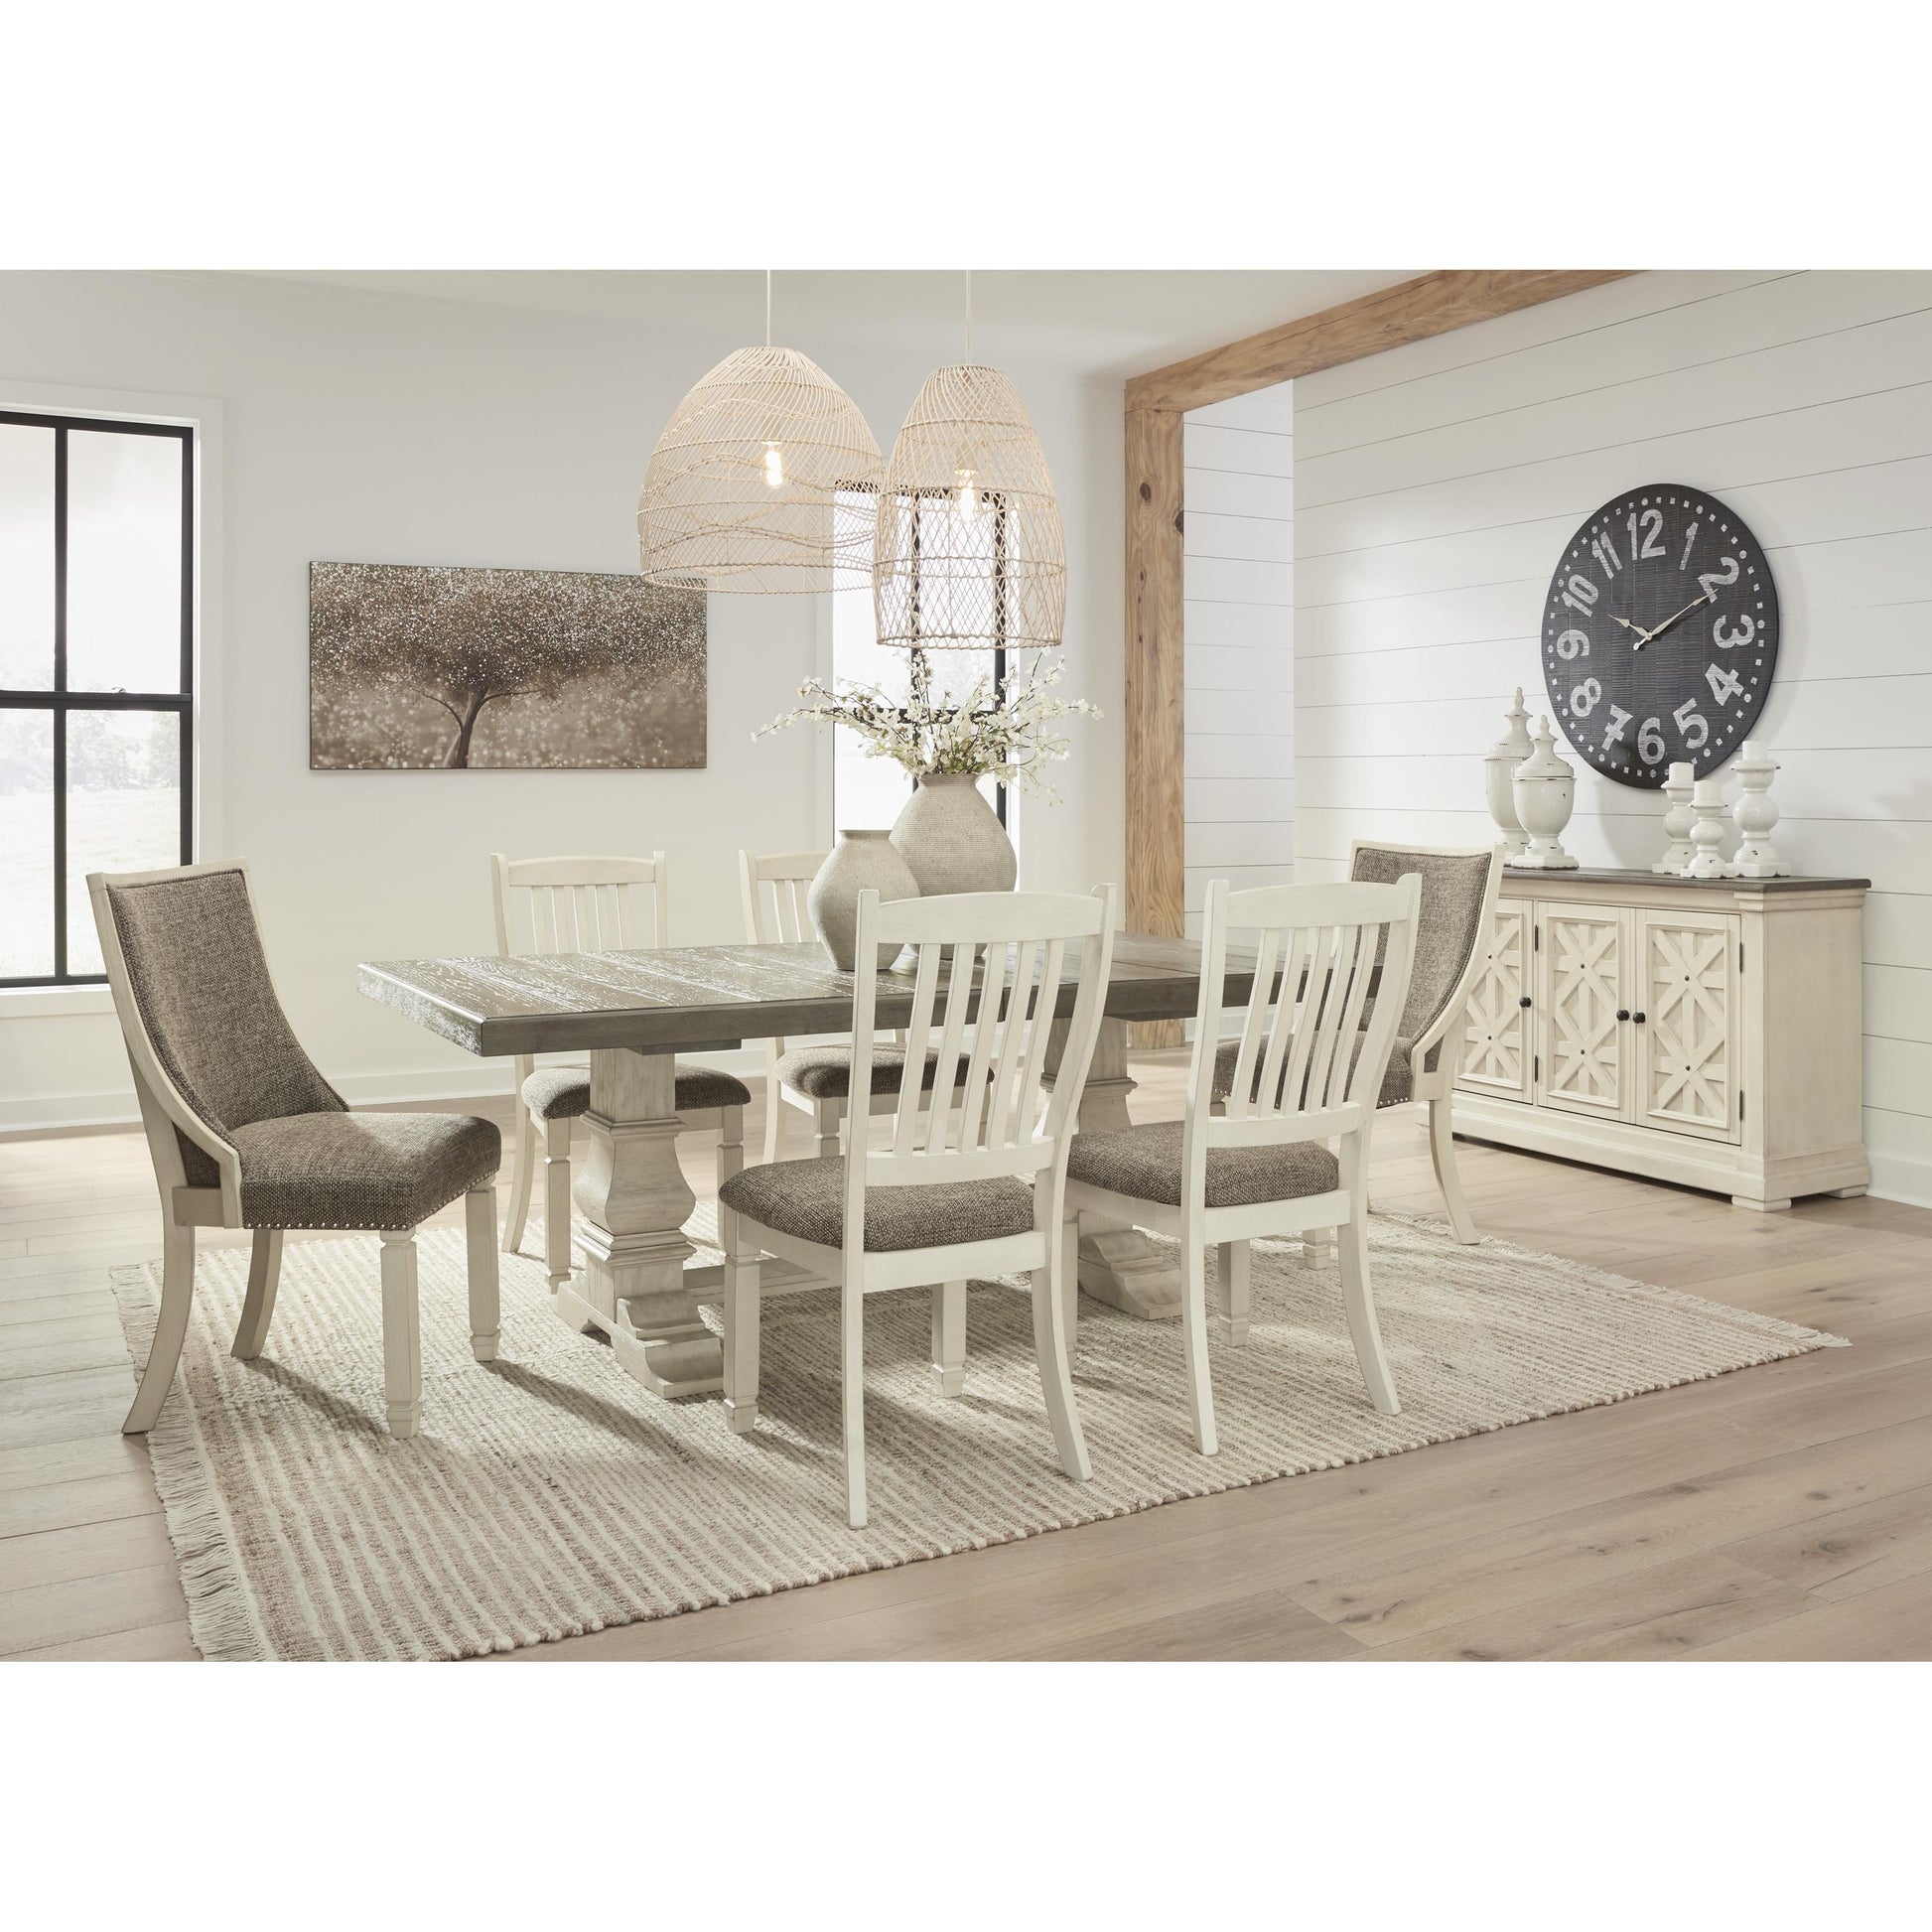 Signature Design by Ashley Bolanburg Dining Table with Trestle Base D647-55T/D647-55B IMAGE 7